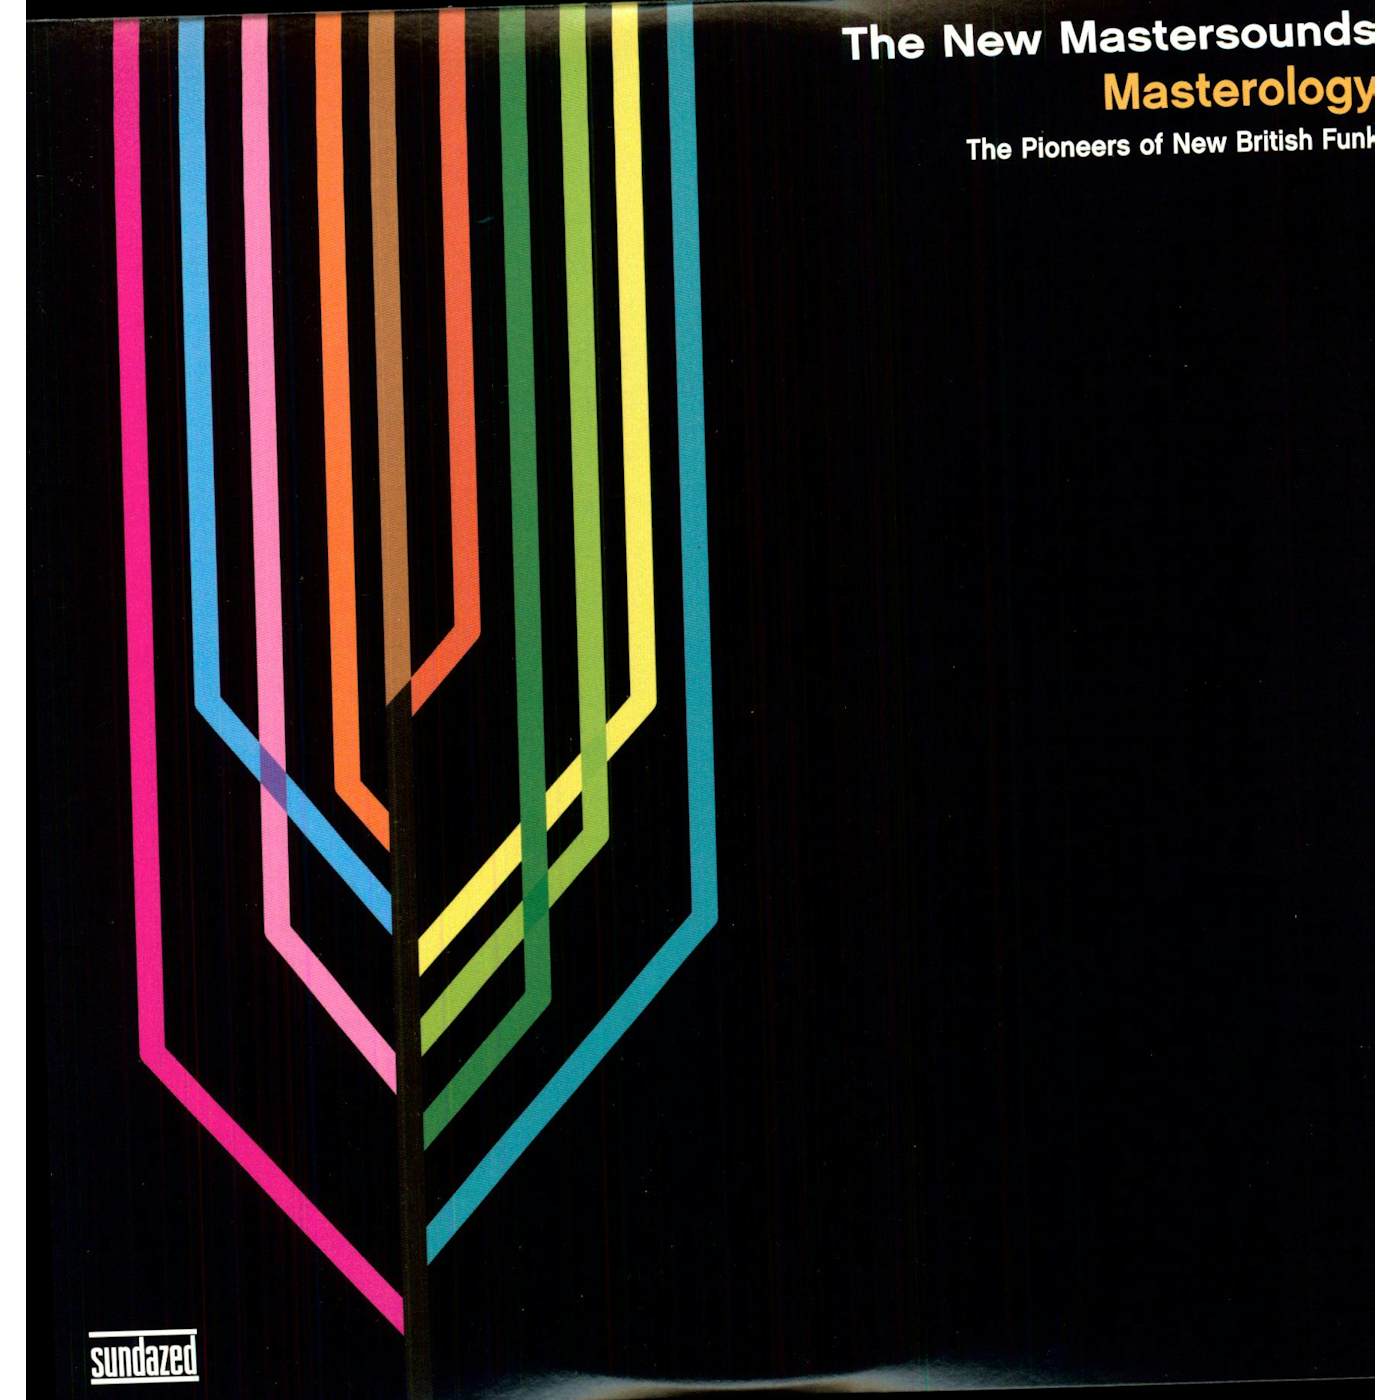 The New Mastersounds MASTEROLOGY Vinyl Record